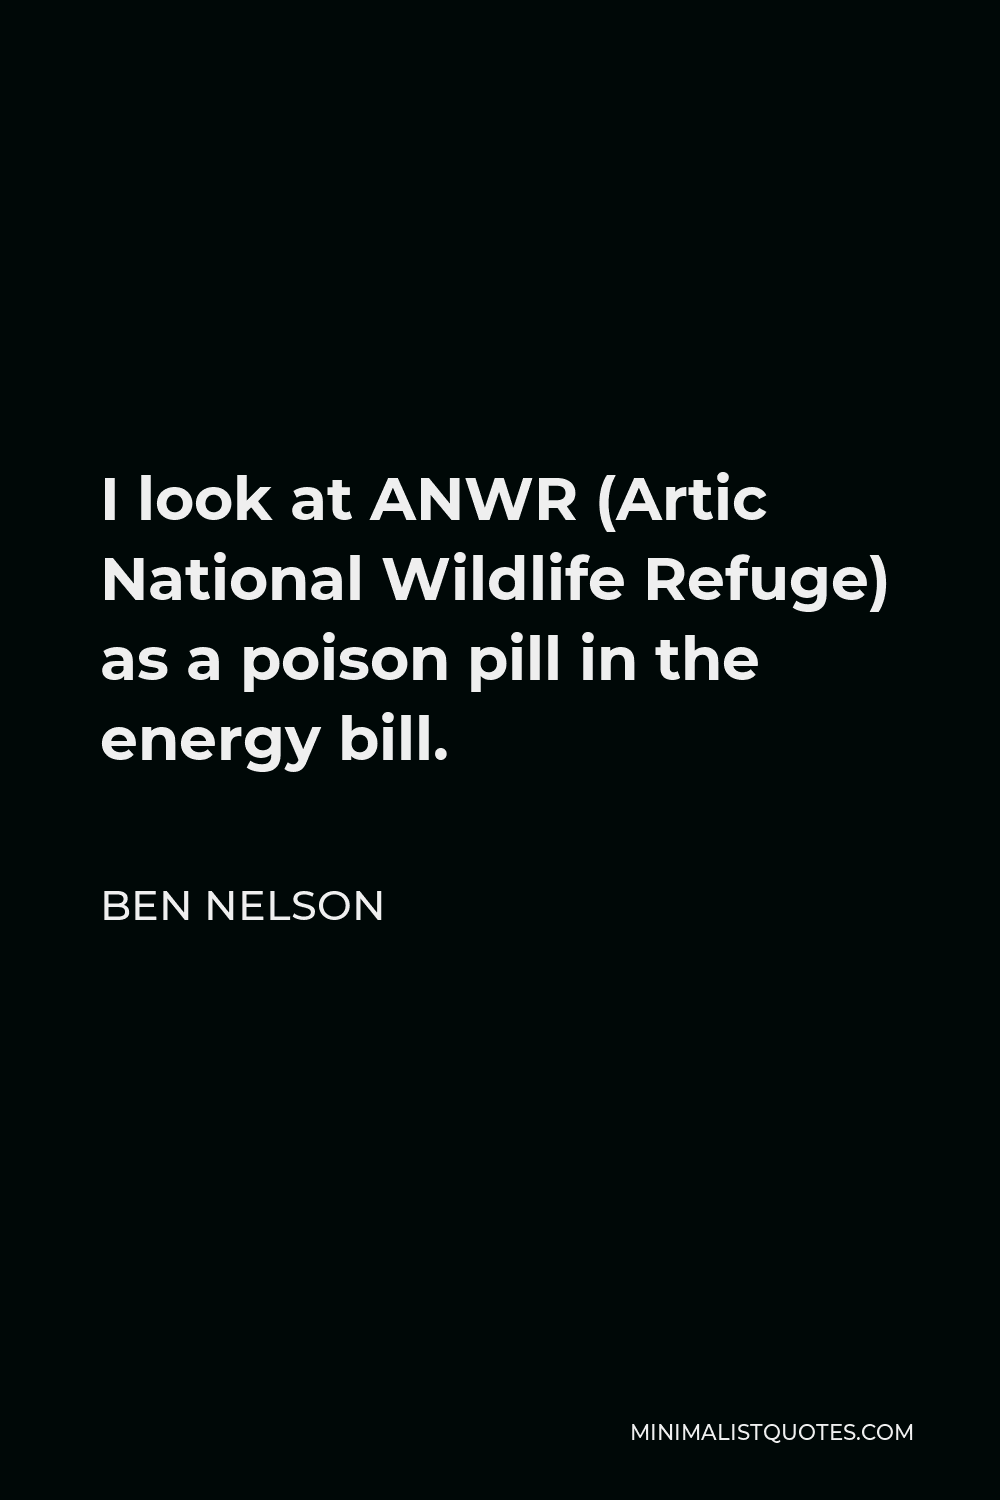 Ben Nelson Quote - I look at ANWR (Artic National Wildlife Refuge) as a poison pill in the energy bill.